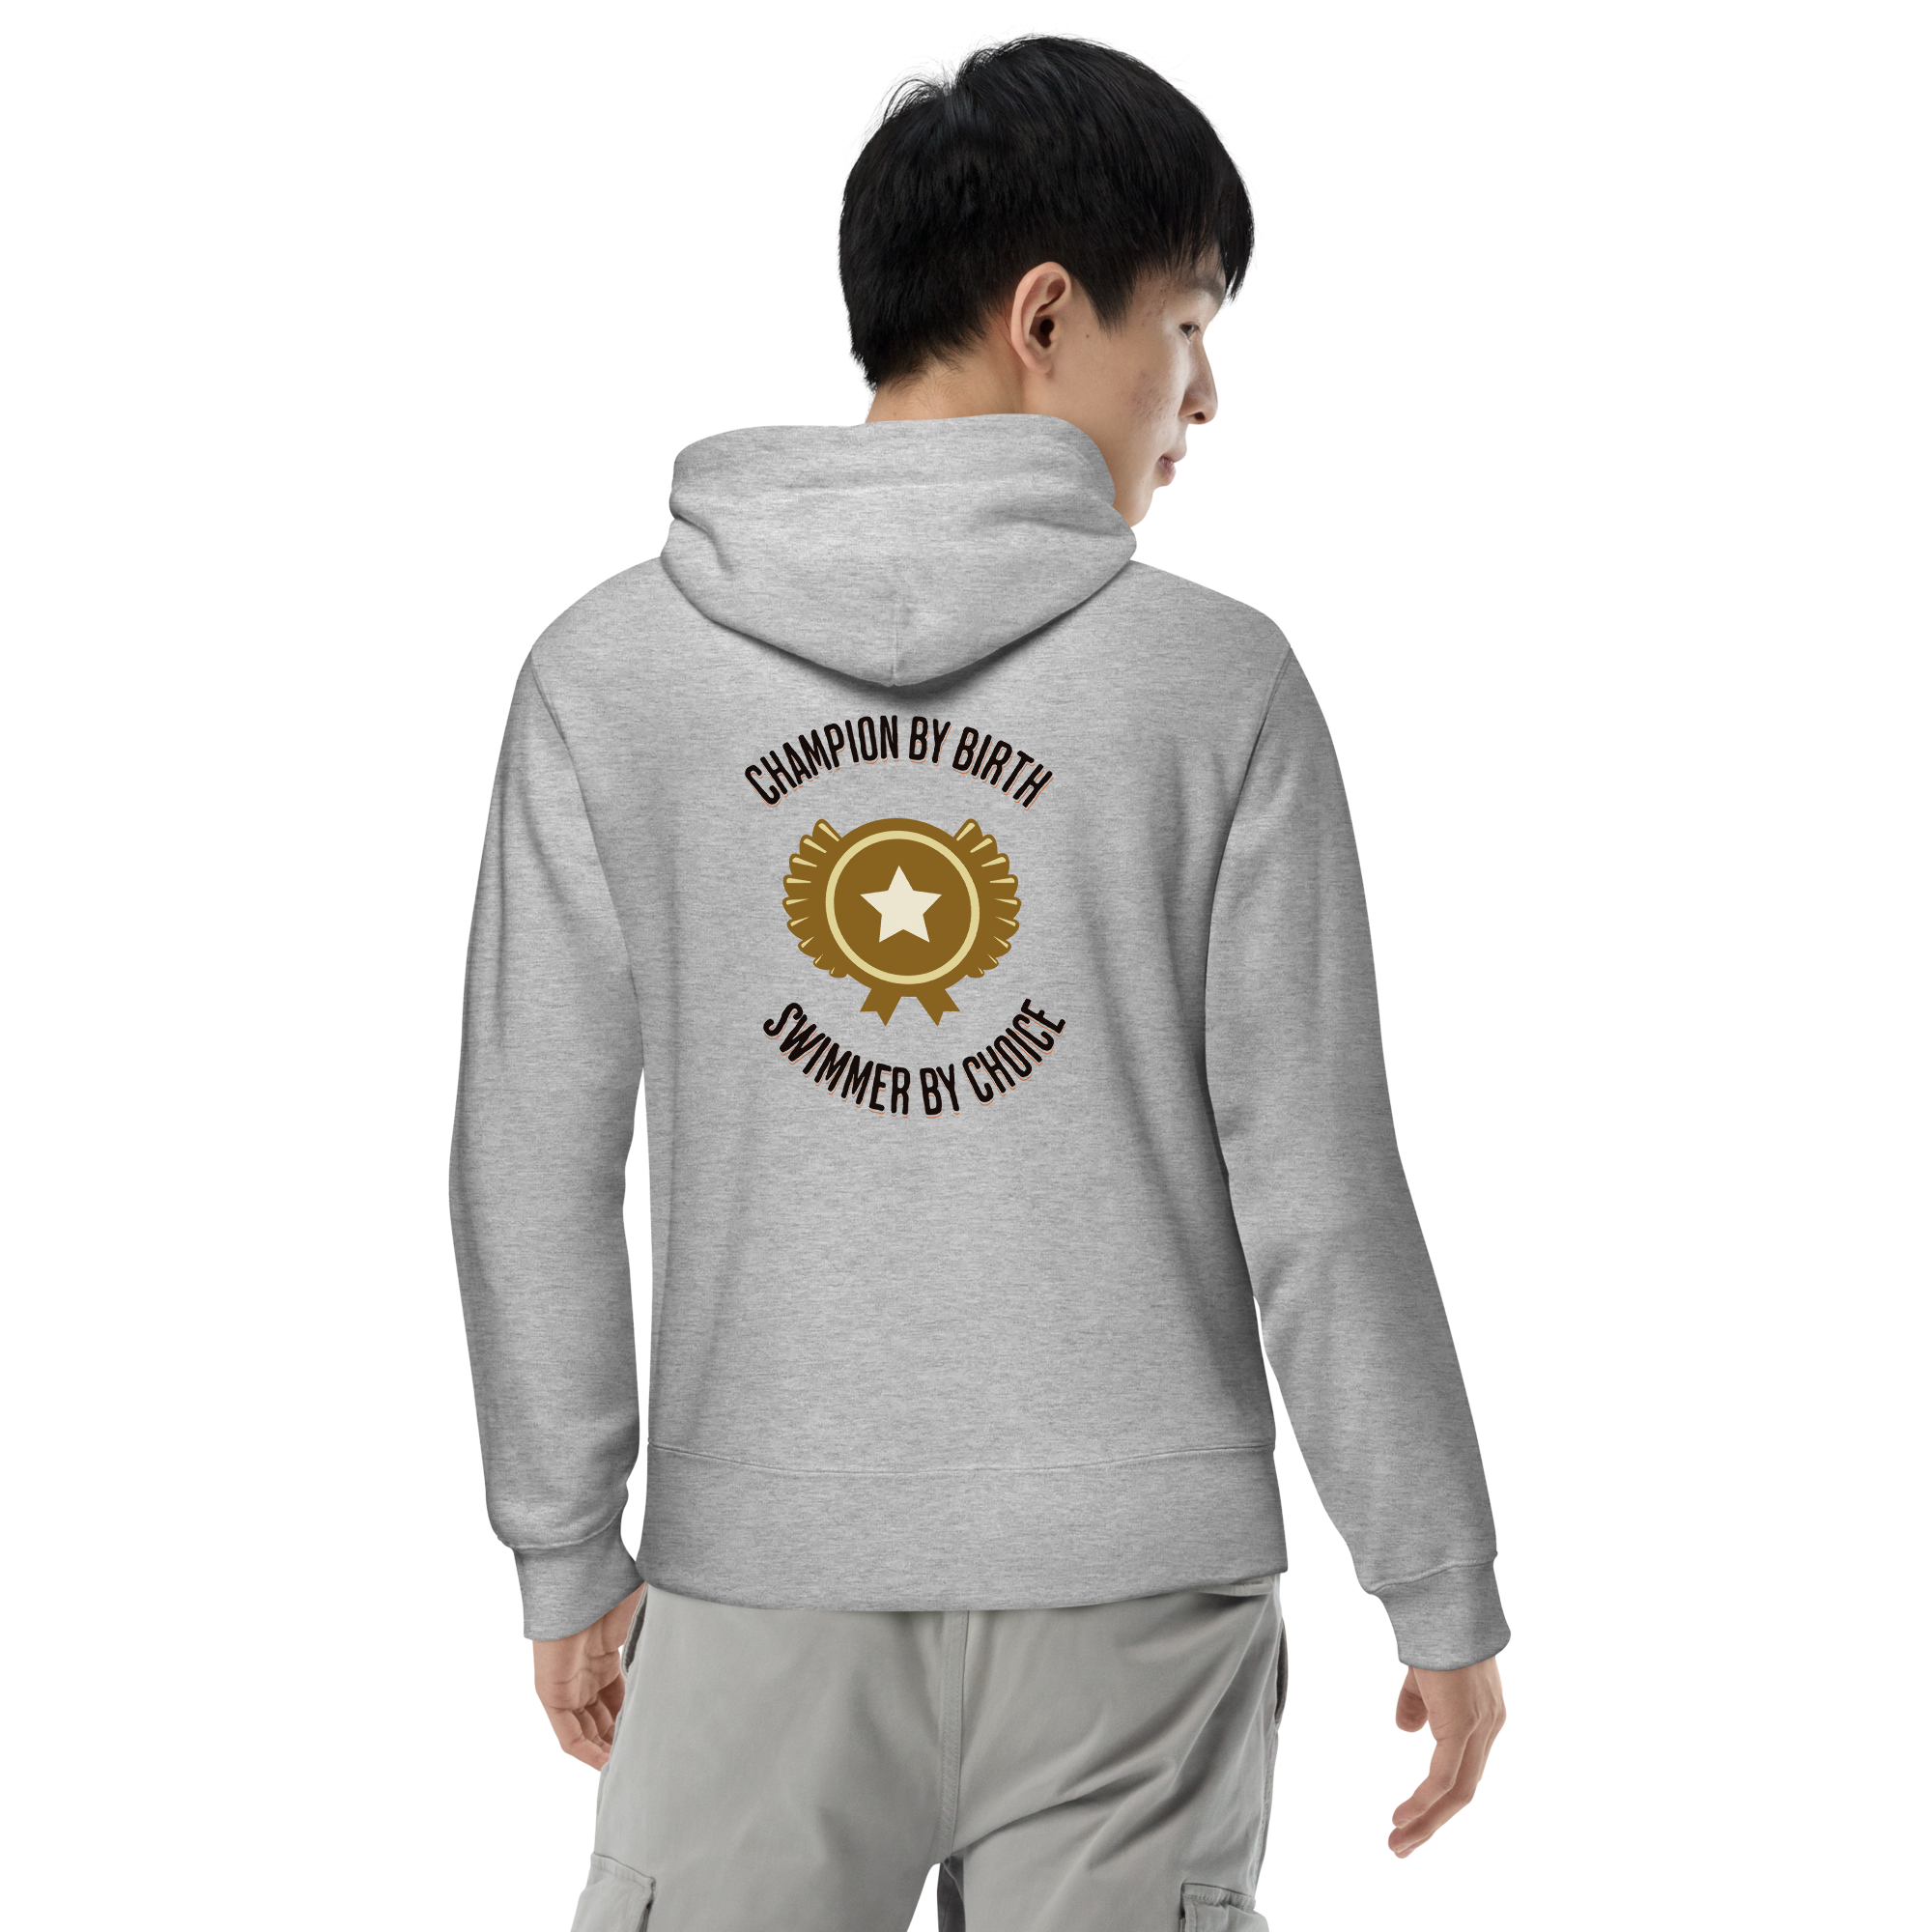 "Champion by Birth, Swimmer by Choice." pullover hoodie